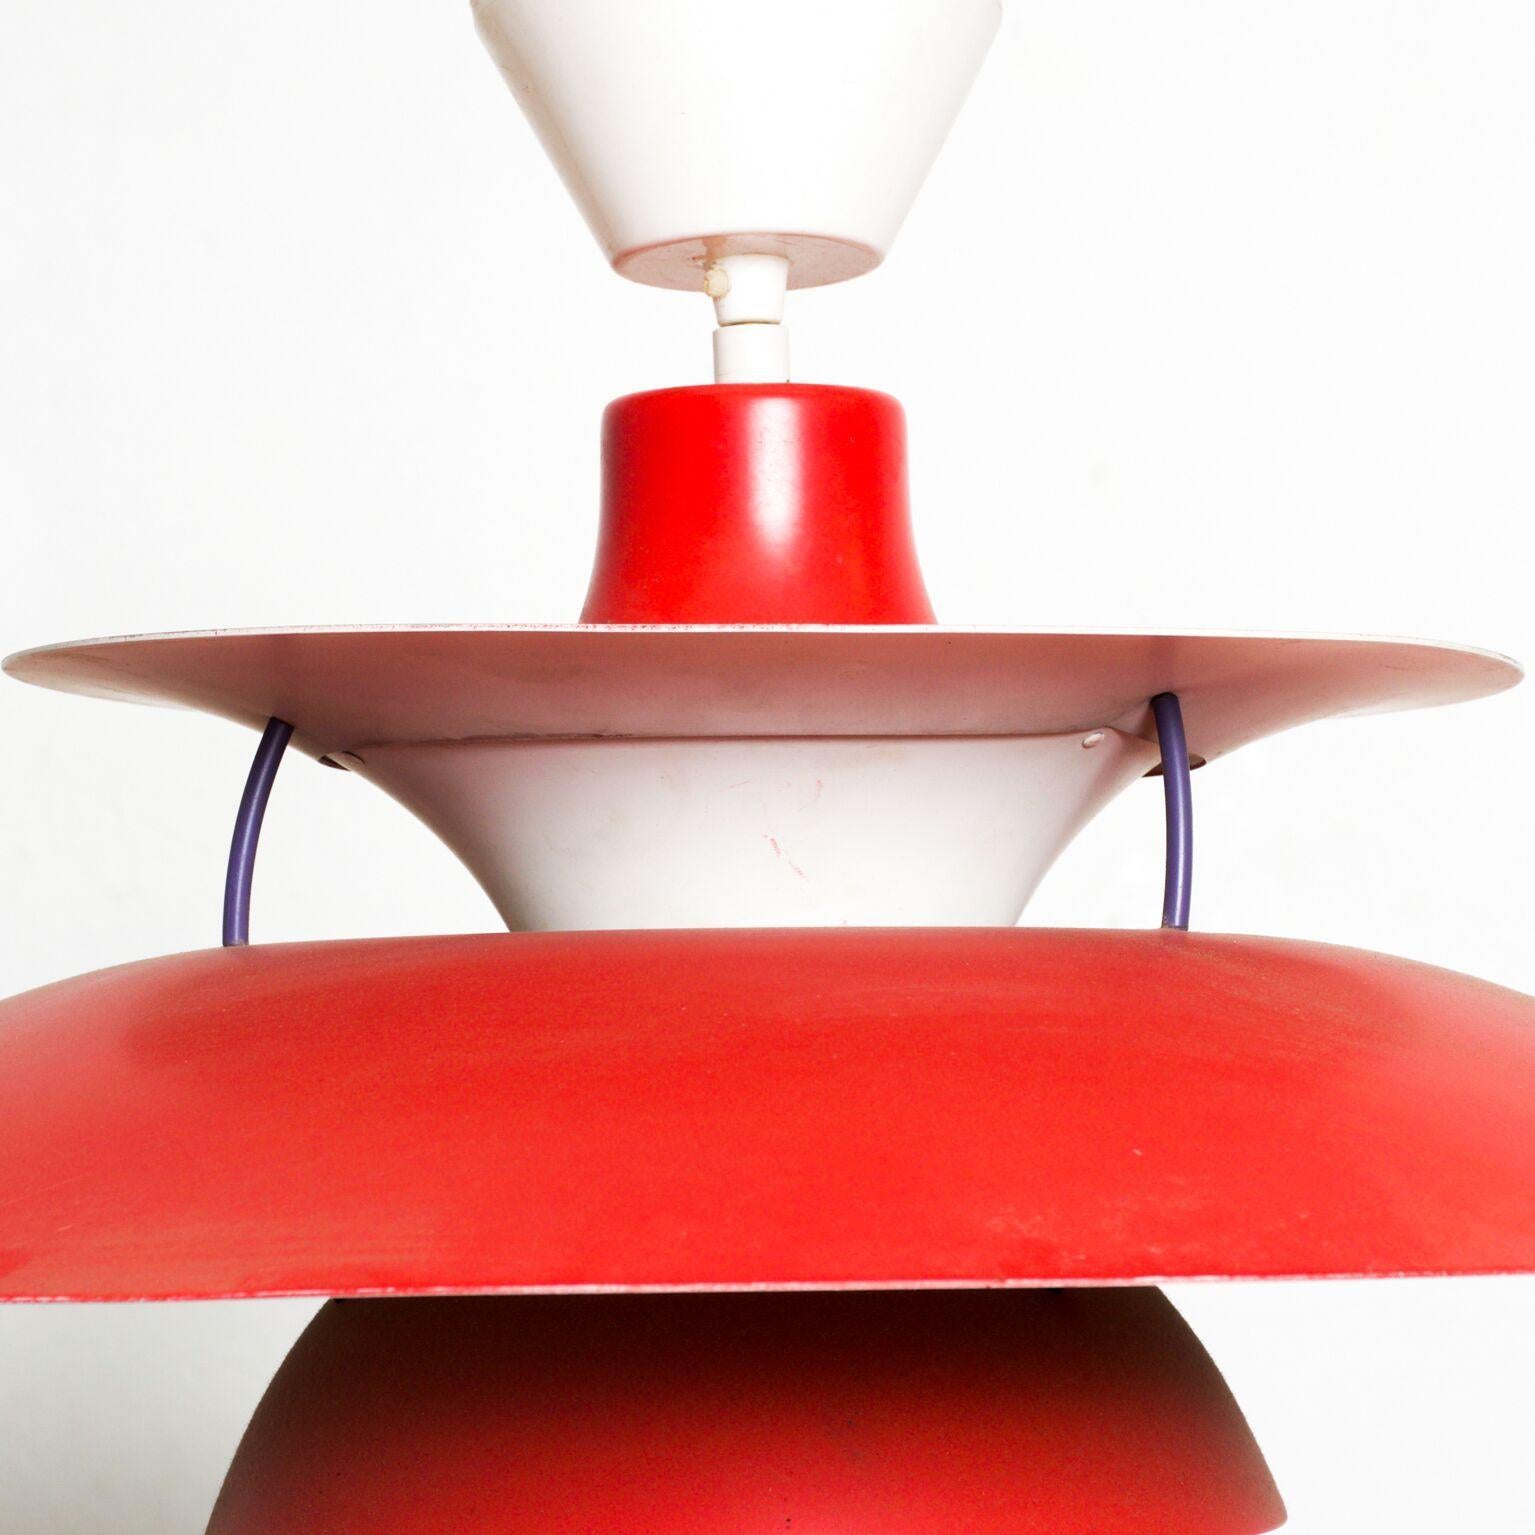 For your consideration: Iconic red hanging light Poul Henningsen for Louis Poulsen Glare Free Classic PH5 pendant lamp, circa 1958. Dimensions: 12